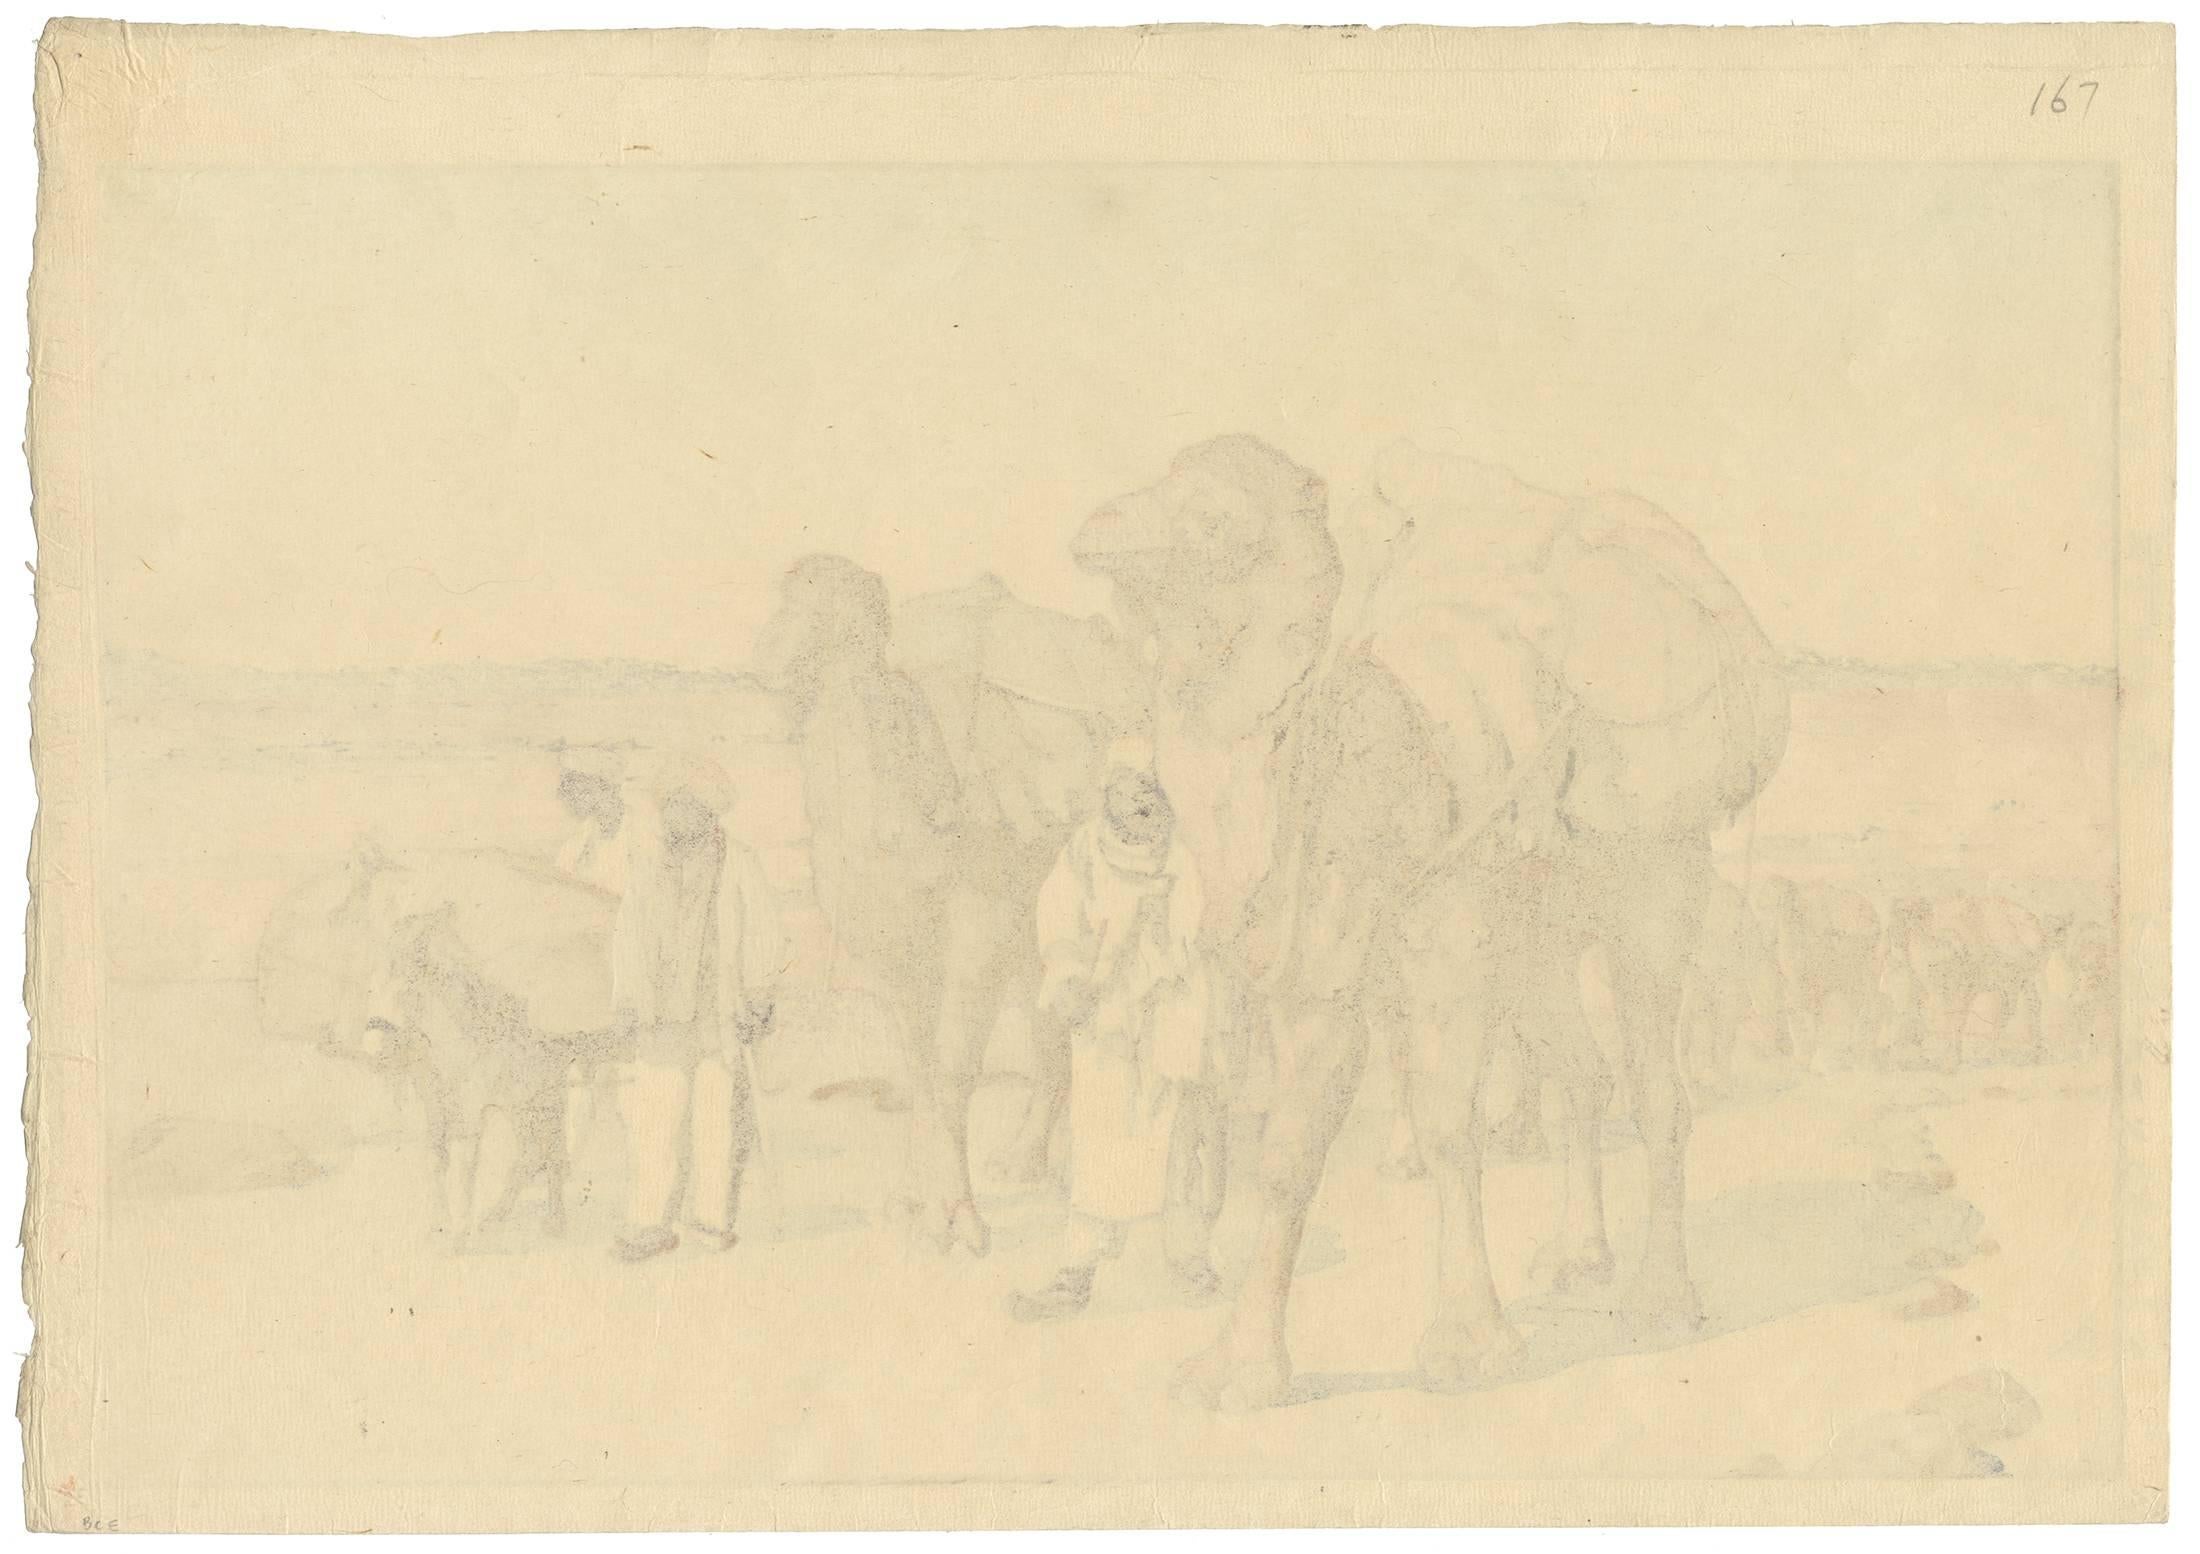 Title: Caravan from Afghanistan
Artist: Hiroshi Yoshida
Self-printed and published by the artist in 1932. Jizuri-sign and pencil signature.

During his numerous travels both in Japan and overseas, Hiroshi Yoshida visited the Middle East. This print